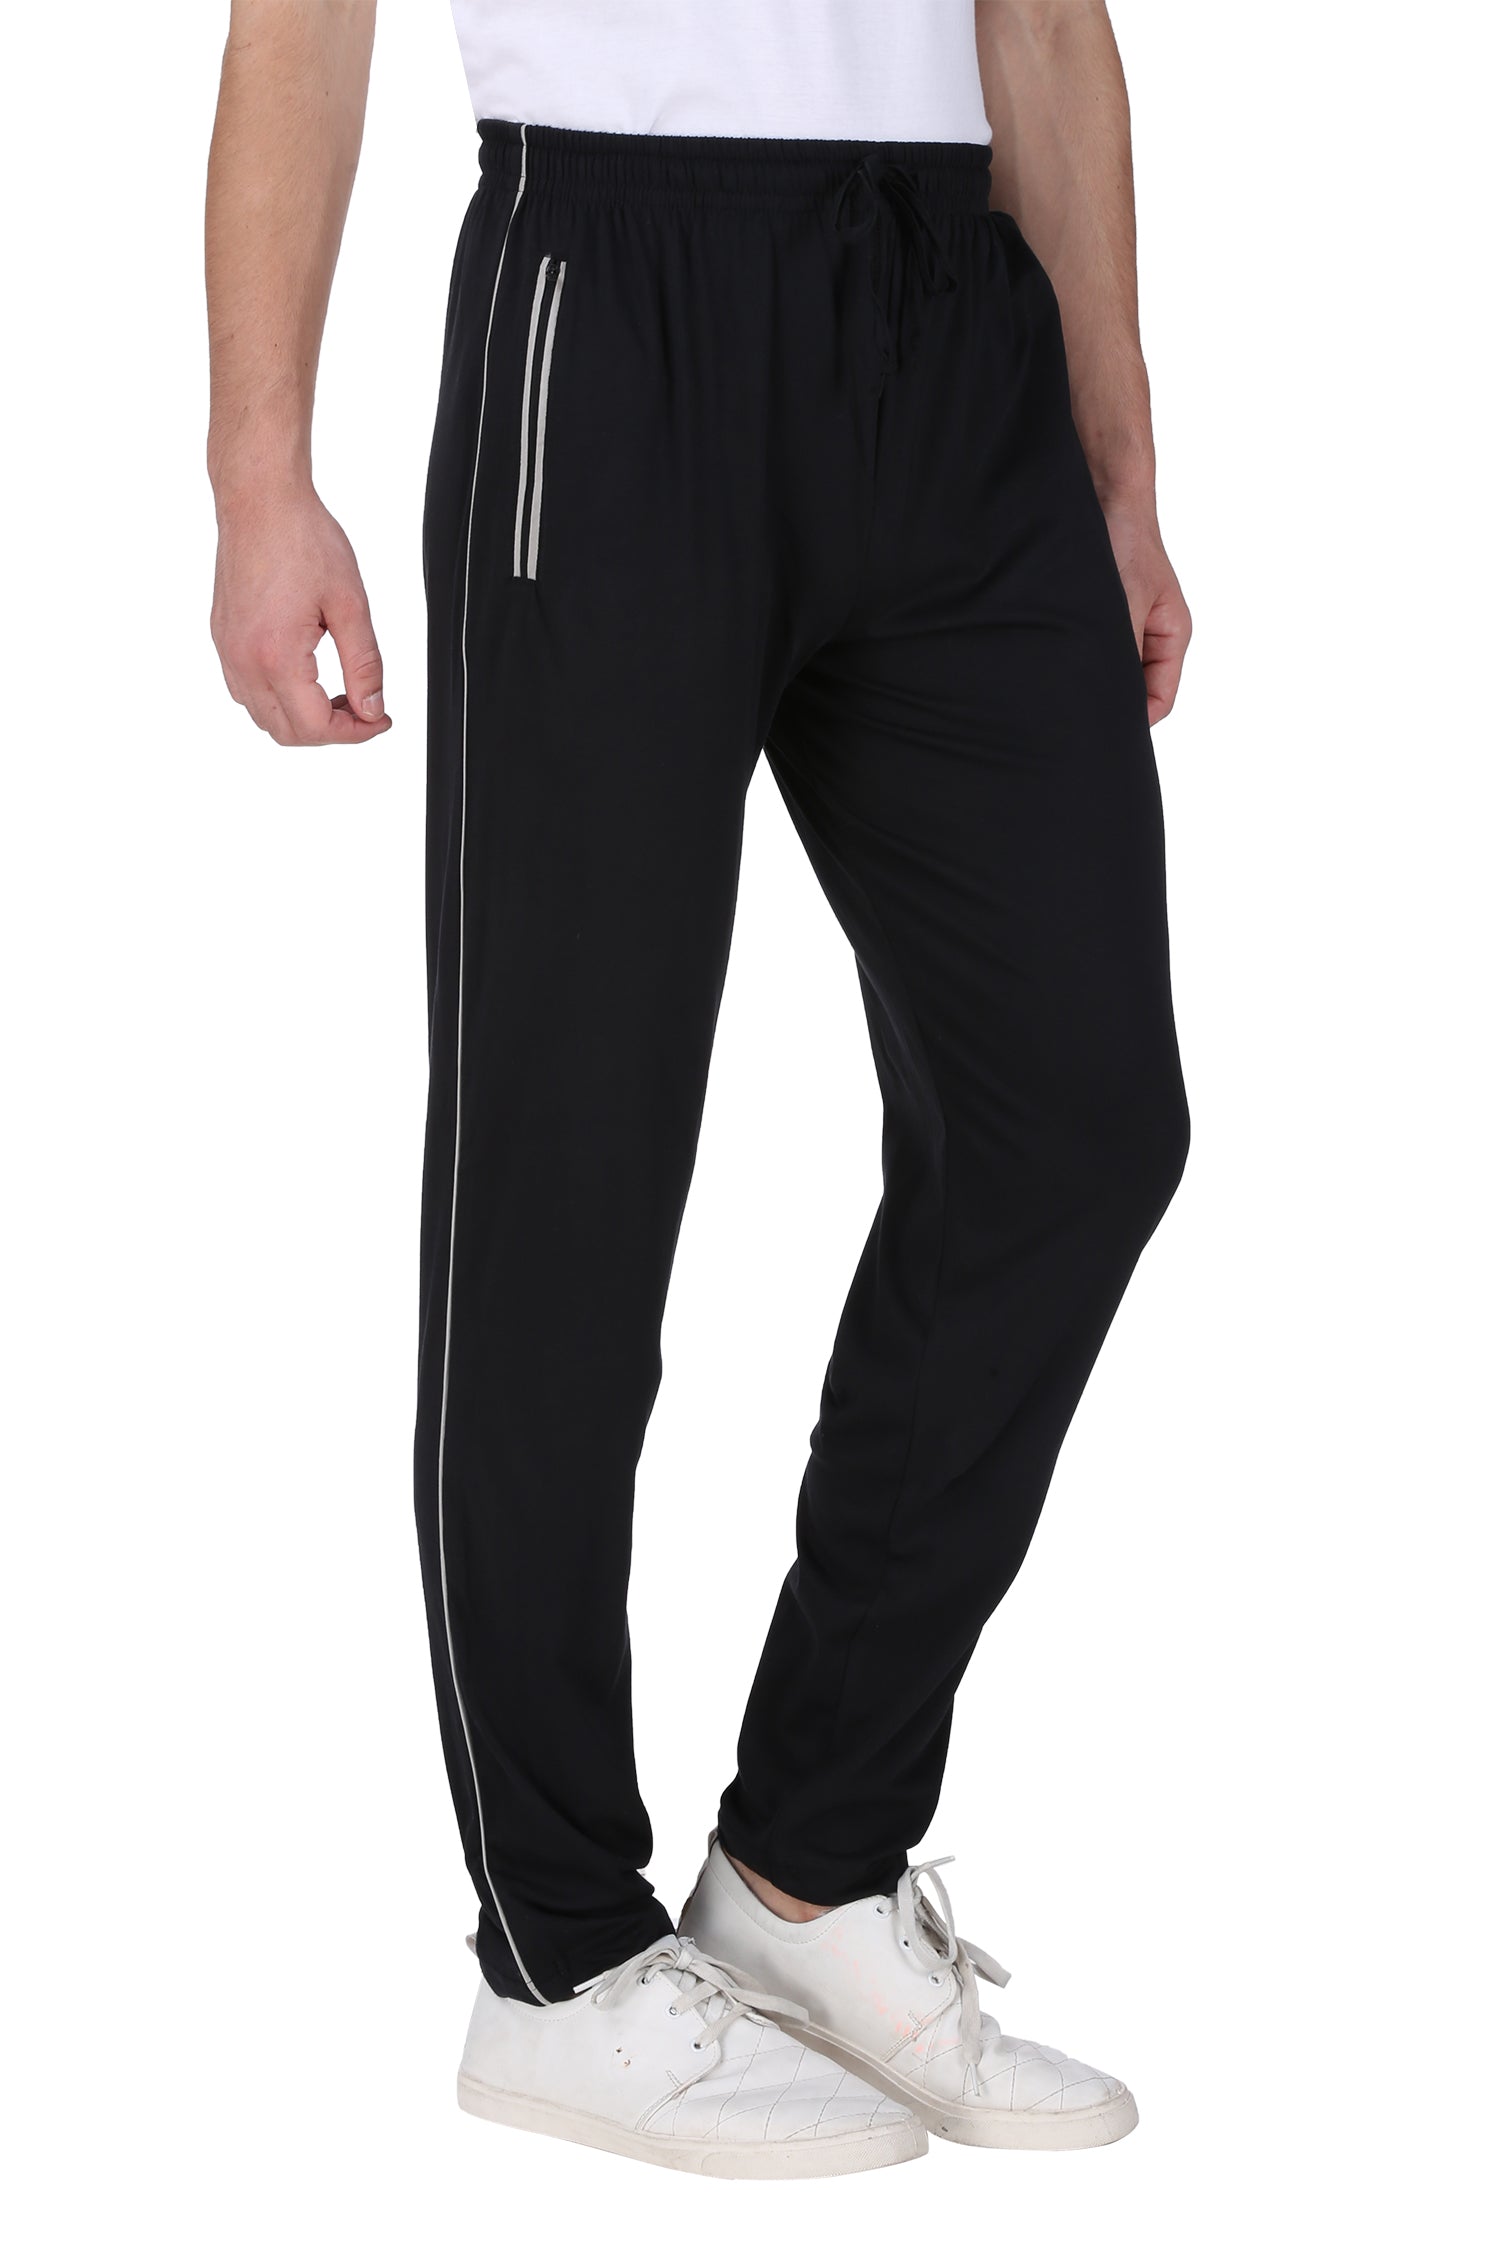 UNIQUE Black Polyester Lycra Trackpants Single  Buy UNIQUE Black Polyester  Lycra Trackpants Single Online at Low Price in India  Snapdeal